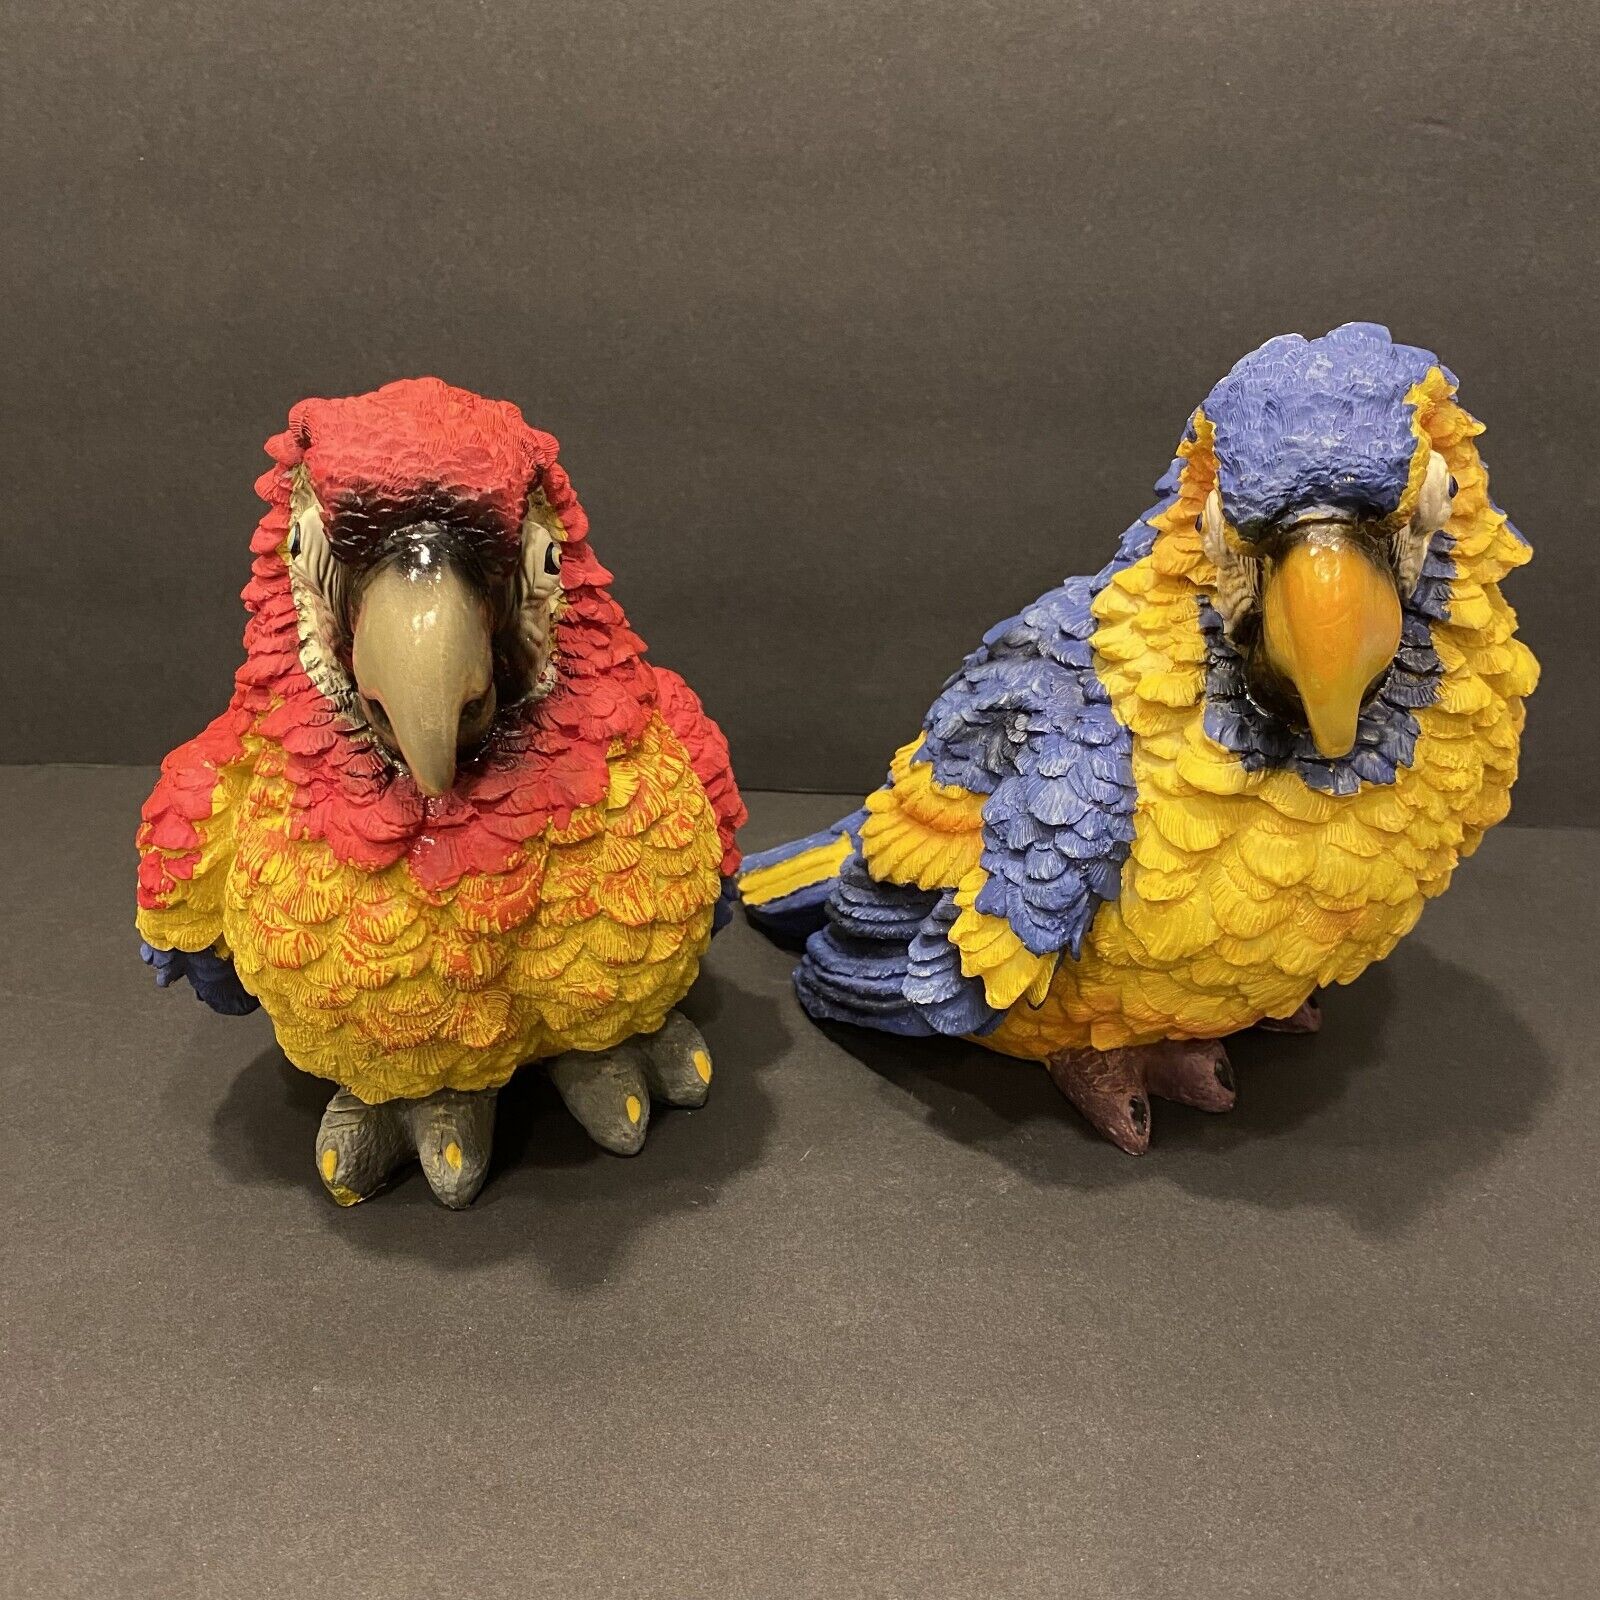 Vtg Parrot Couple Bright Red & Blue Hand Painted Figurines Statues Decor Gift 